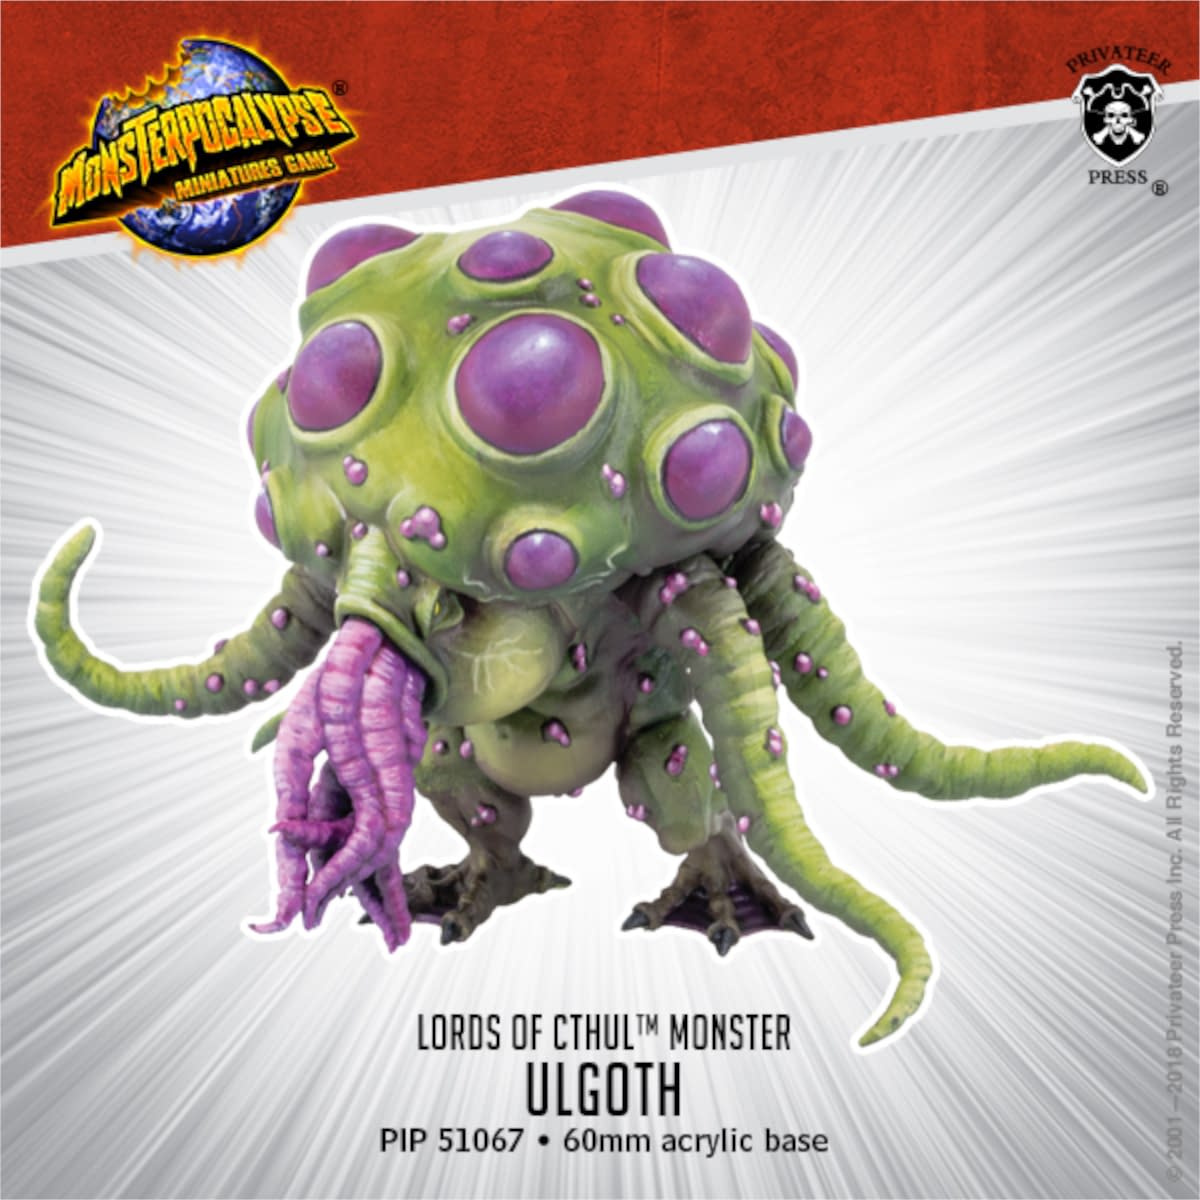 New "Monsterpocalypse" releases: Ulgoth, Apes, and Robots, Oh My!